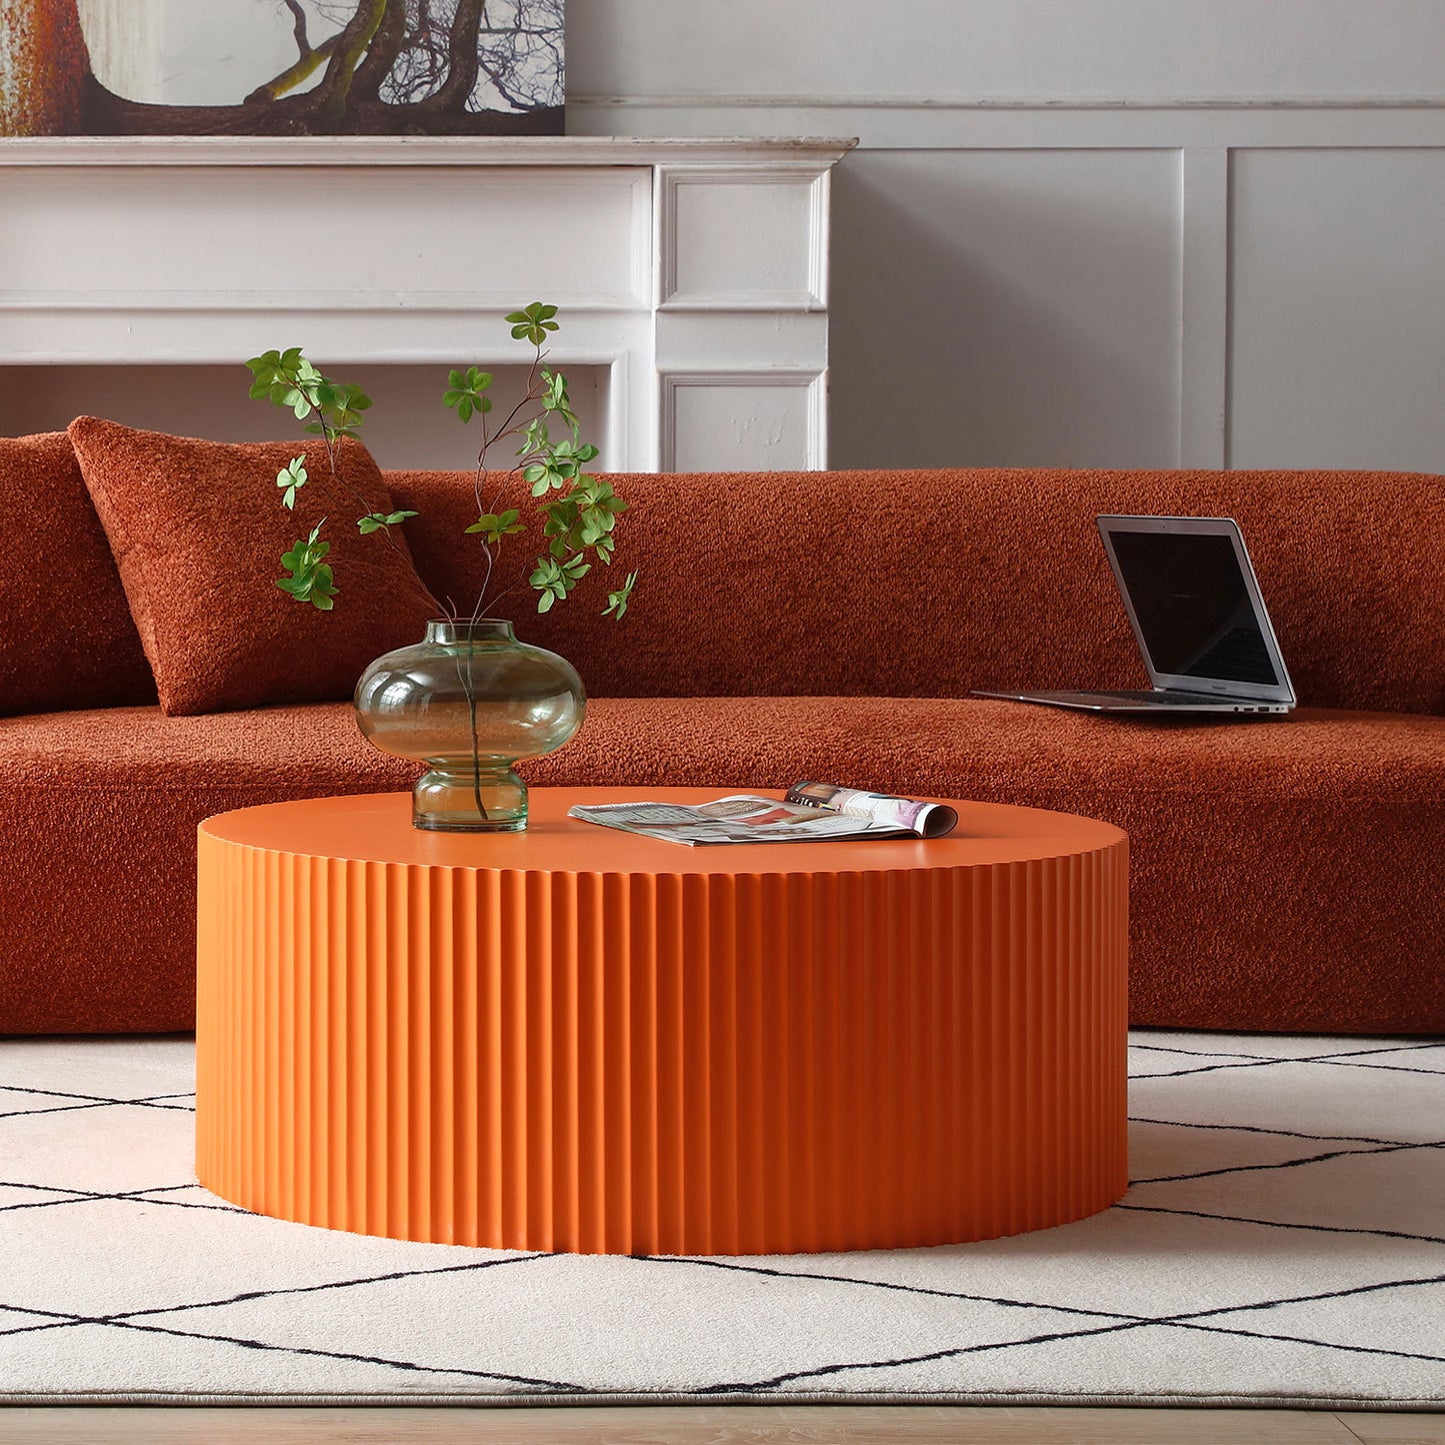 Handcrafted Round MDF Coffee Table with Intricate Relief Design φ35.43inch, Vibrant Orange Color